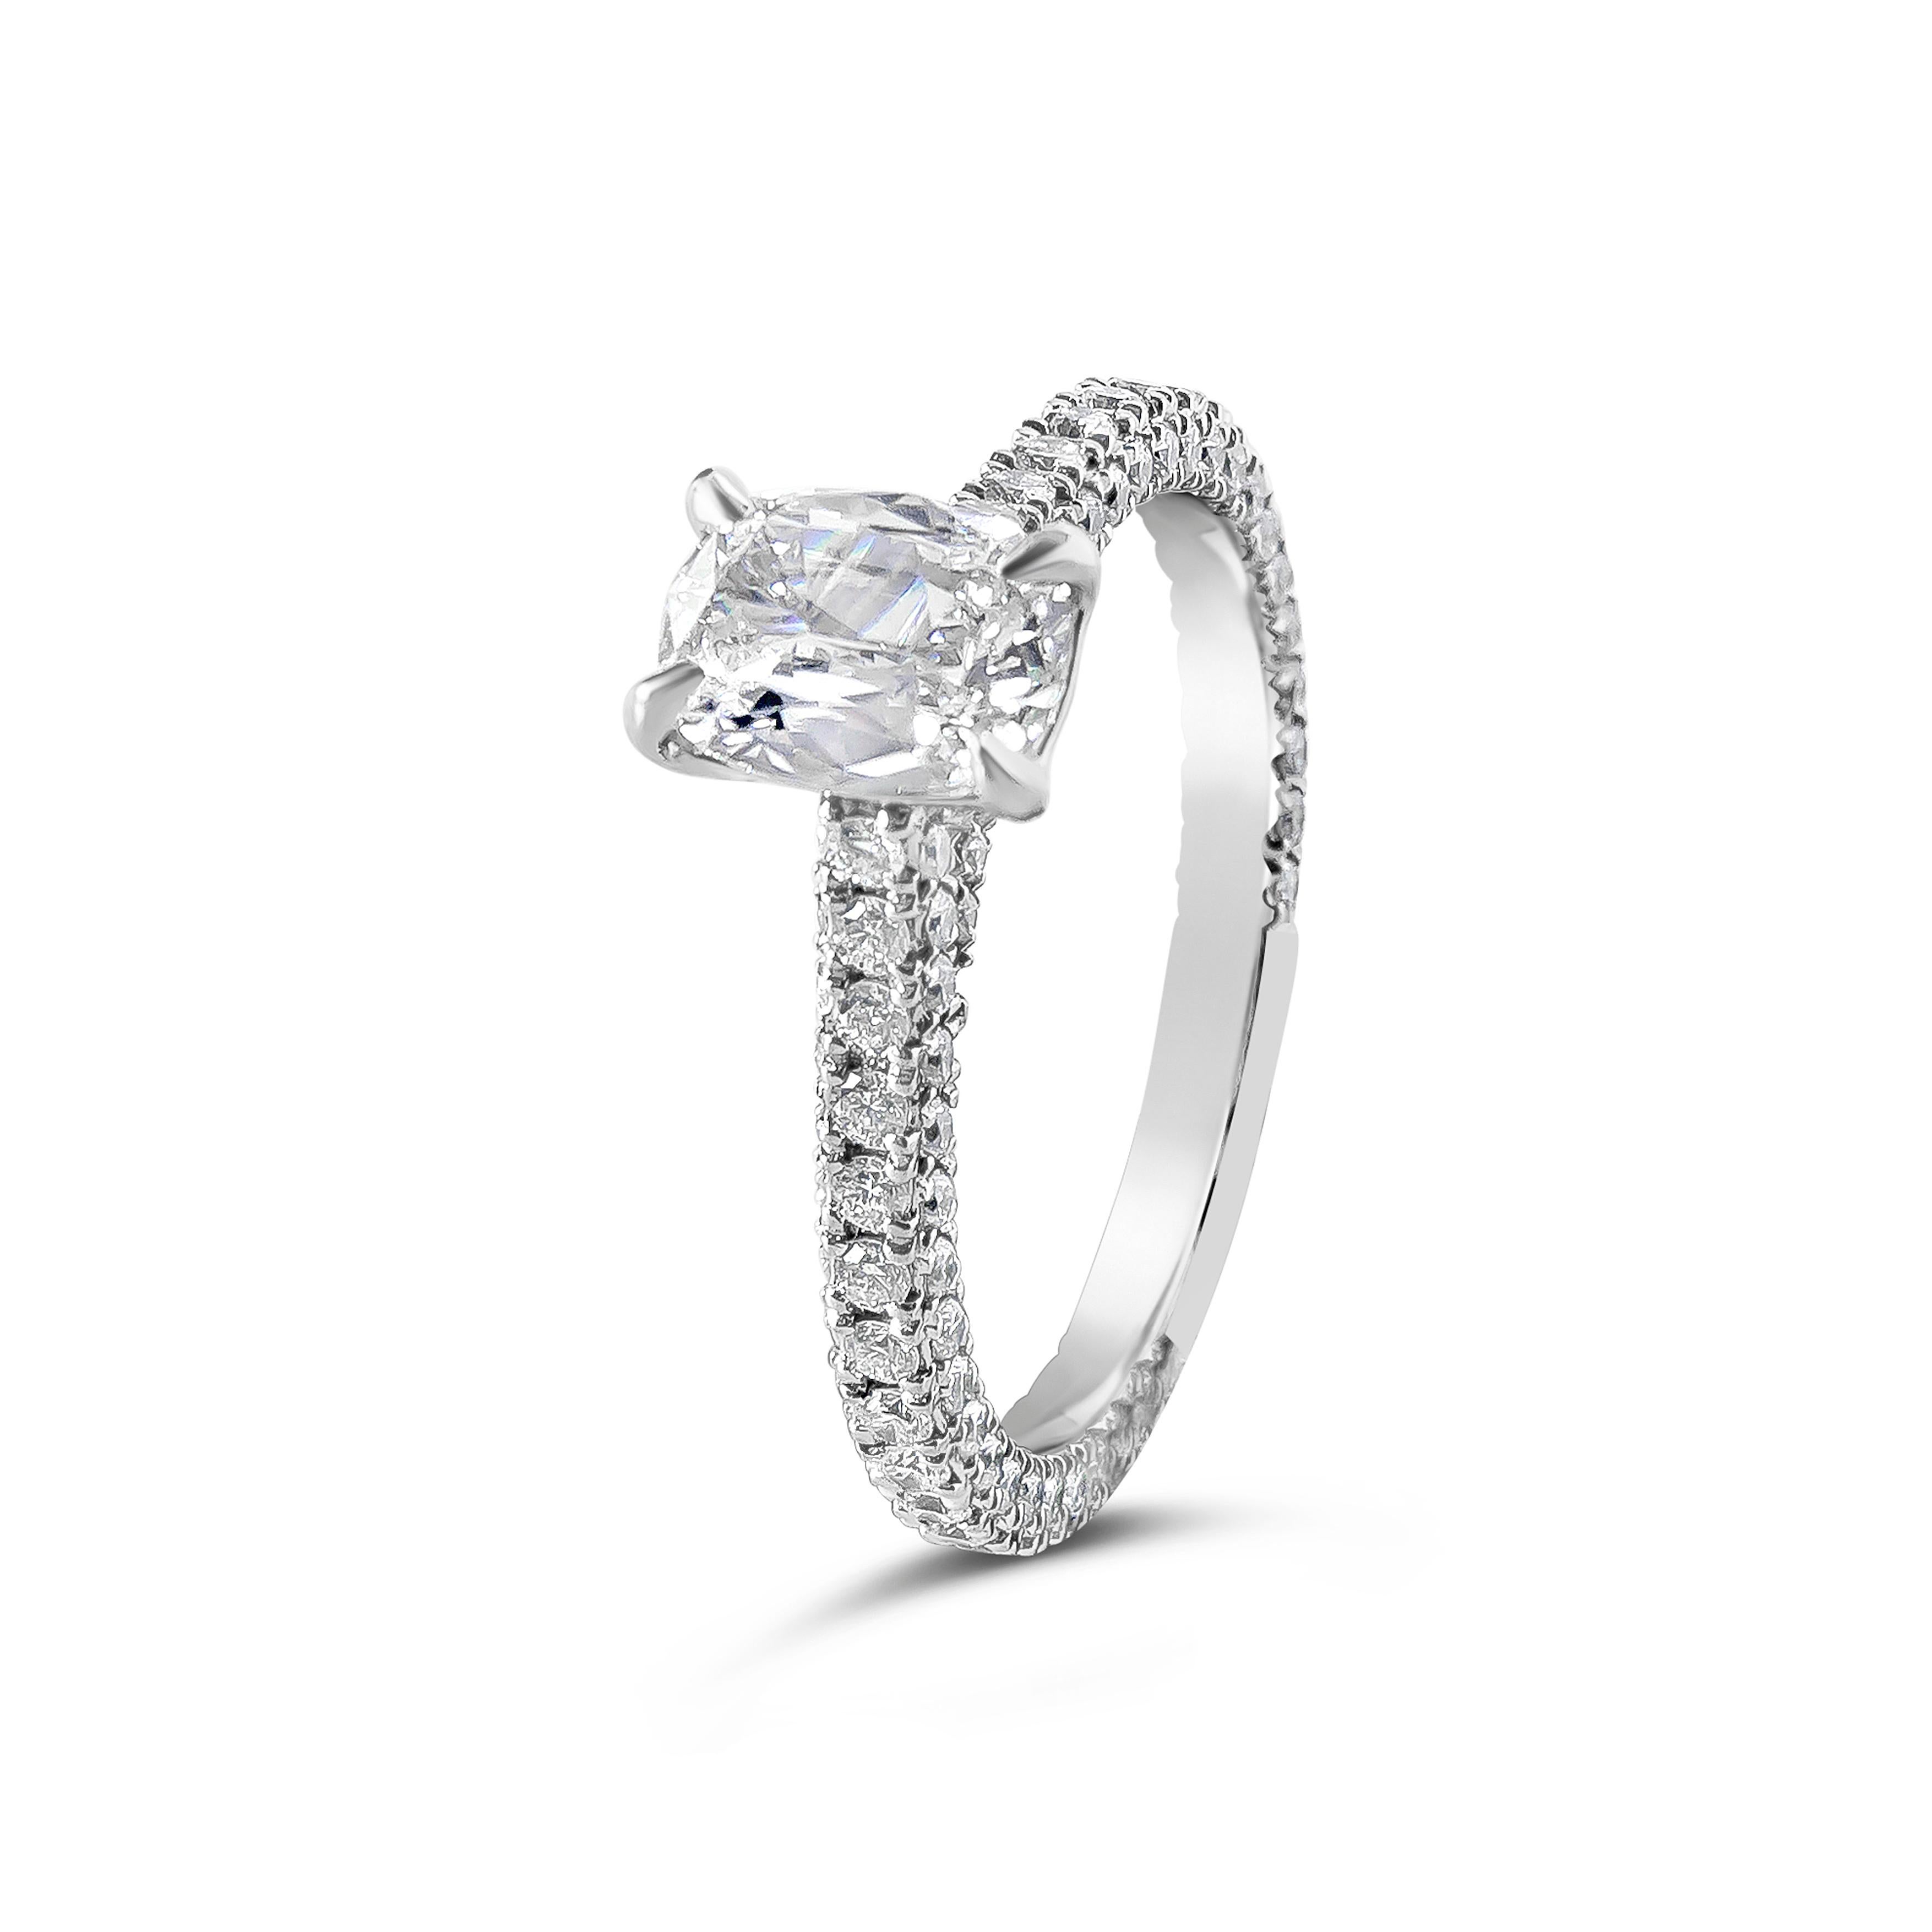 Showcasing a 0.85 carats elongated cushion cut diamond securely set in four prong basket setting certified by GIA as I color and VS2 in clarity. Set in an intricately designed platinum shank micro-pave set with round brilliant diamonds. Accent